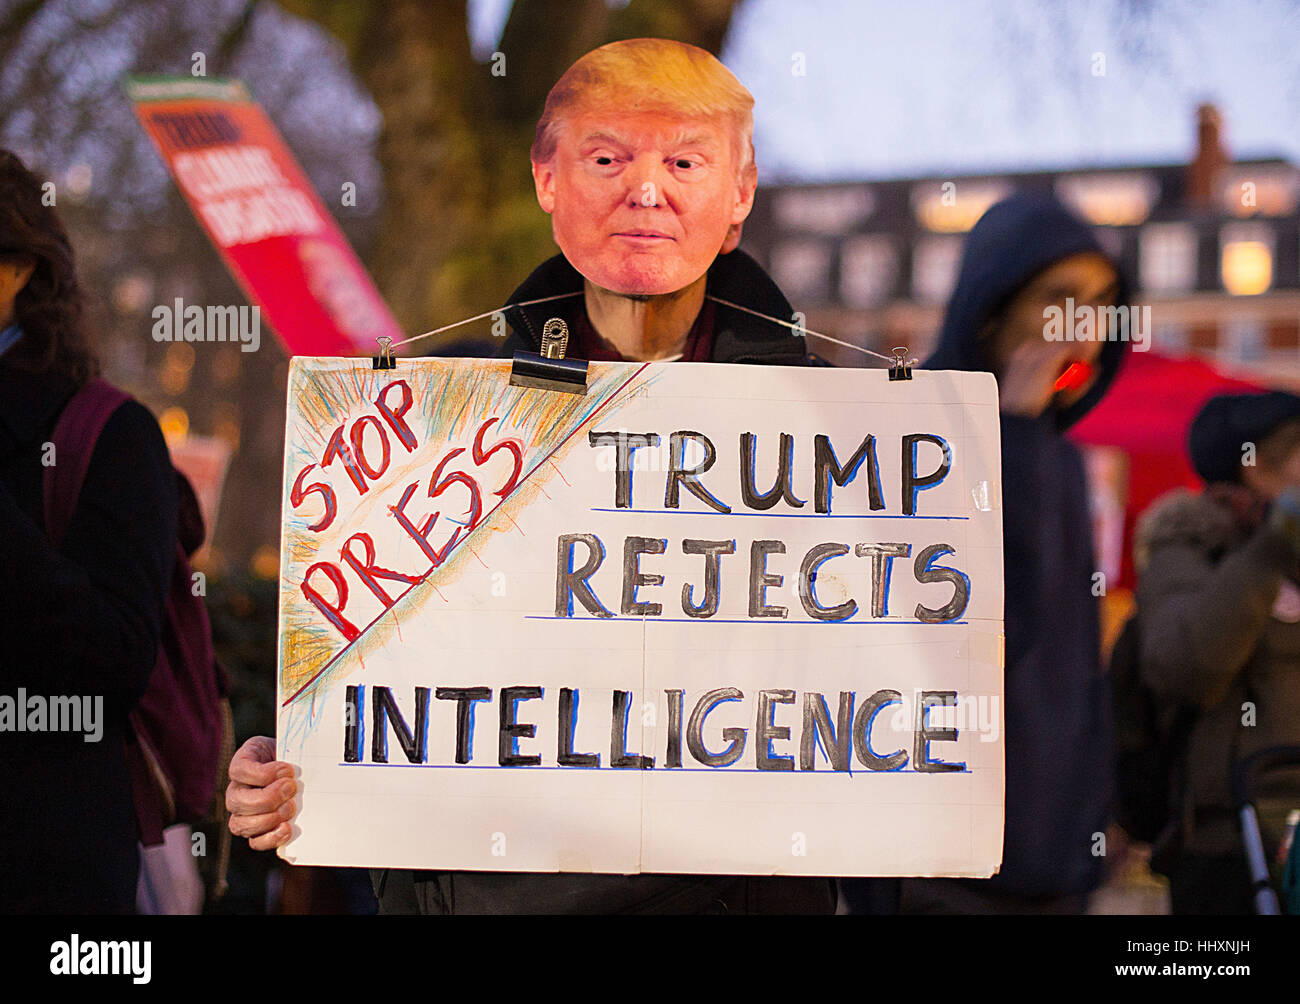 A protestor wearing a Donald Trump mask takes part in a demonstration outside the US Embassy, in Grosvenor Square, London, following the inauguration of US President Donald Trump. Stock Photo